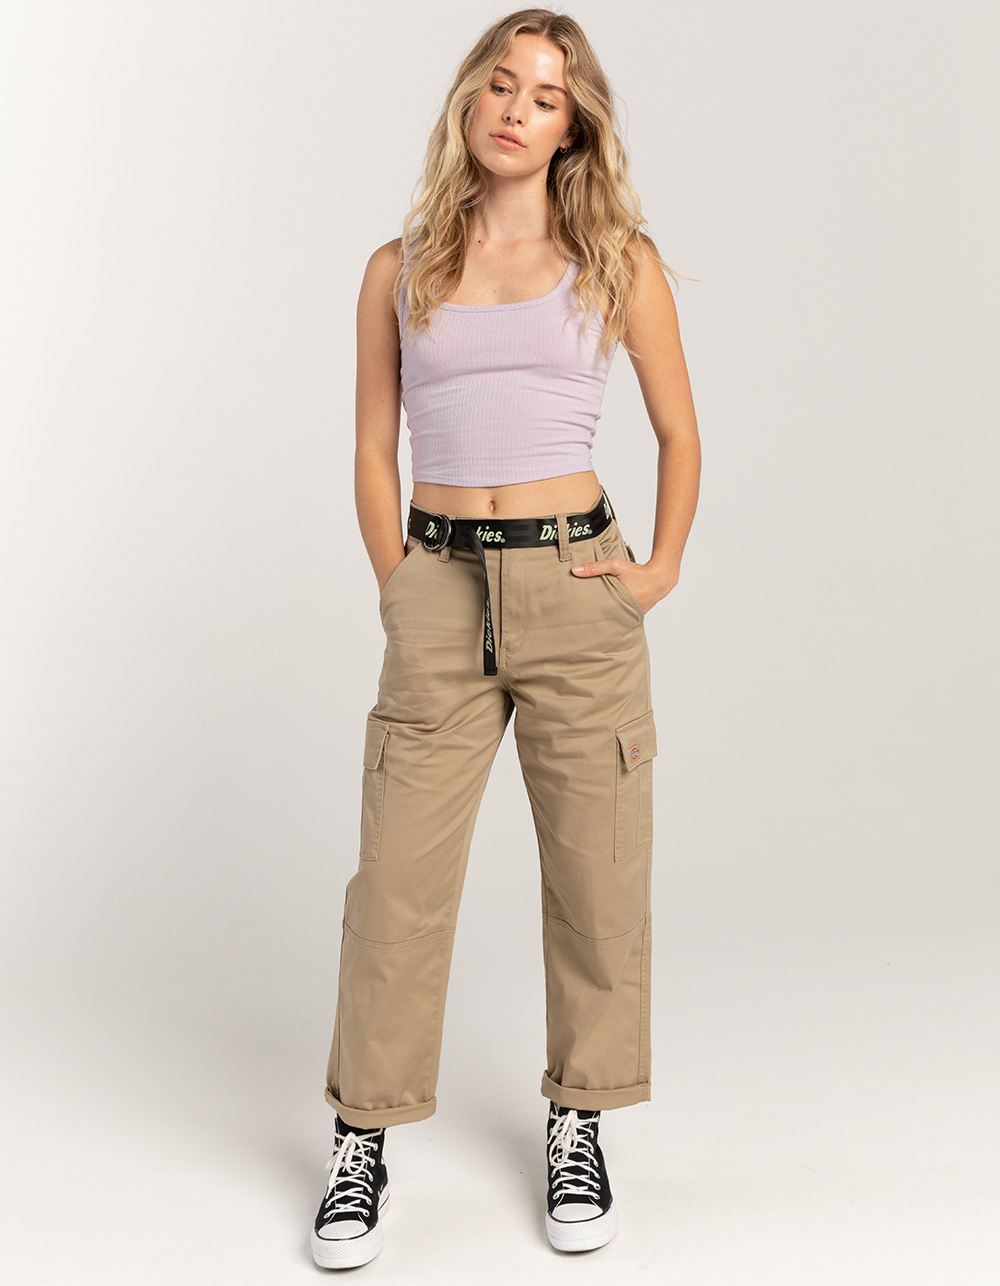 GENUINE DICKIES WOMEN'S PERFECTLY SLIMMING CARGO PANT - Conseil